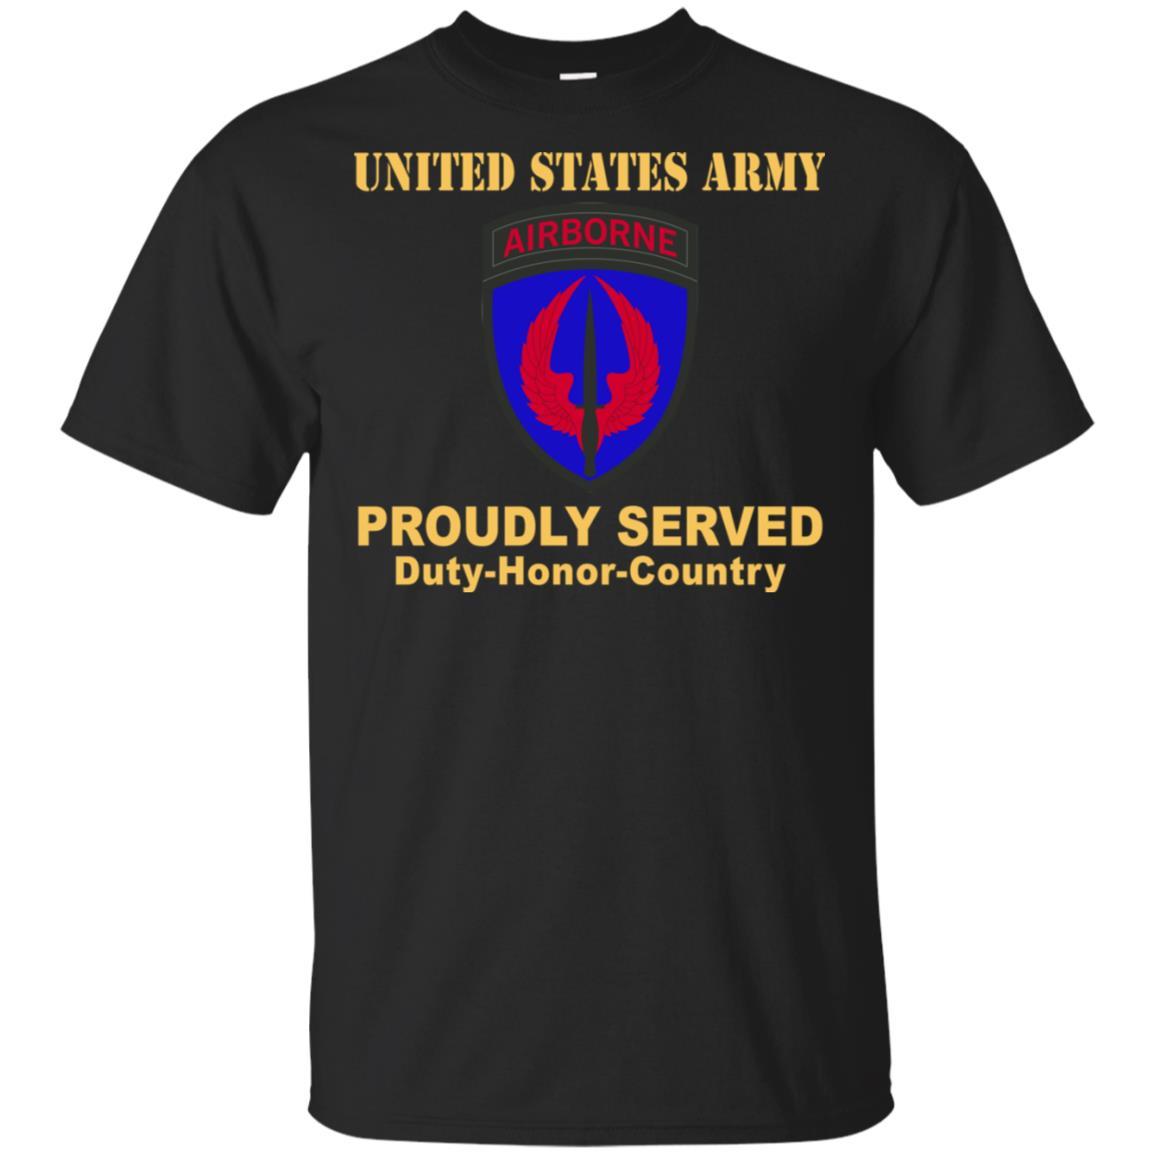 US ARMY SPECIAL OPERATIONS AVIATION COMMAND- Proudly Served T-Shirt On Front For Men-TShirt-Army-Veterans Nation